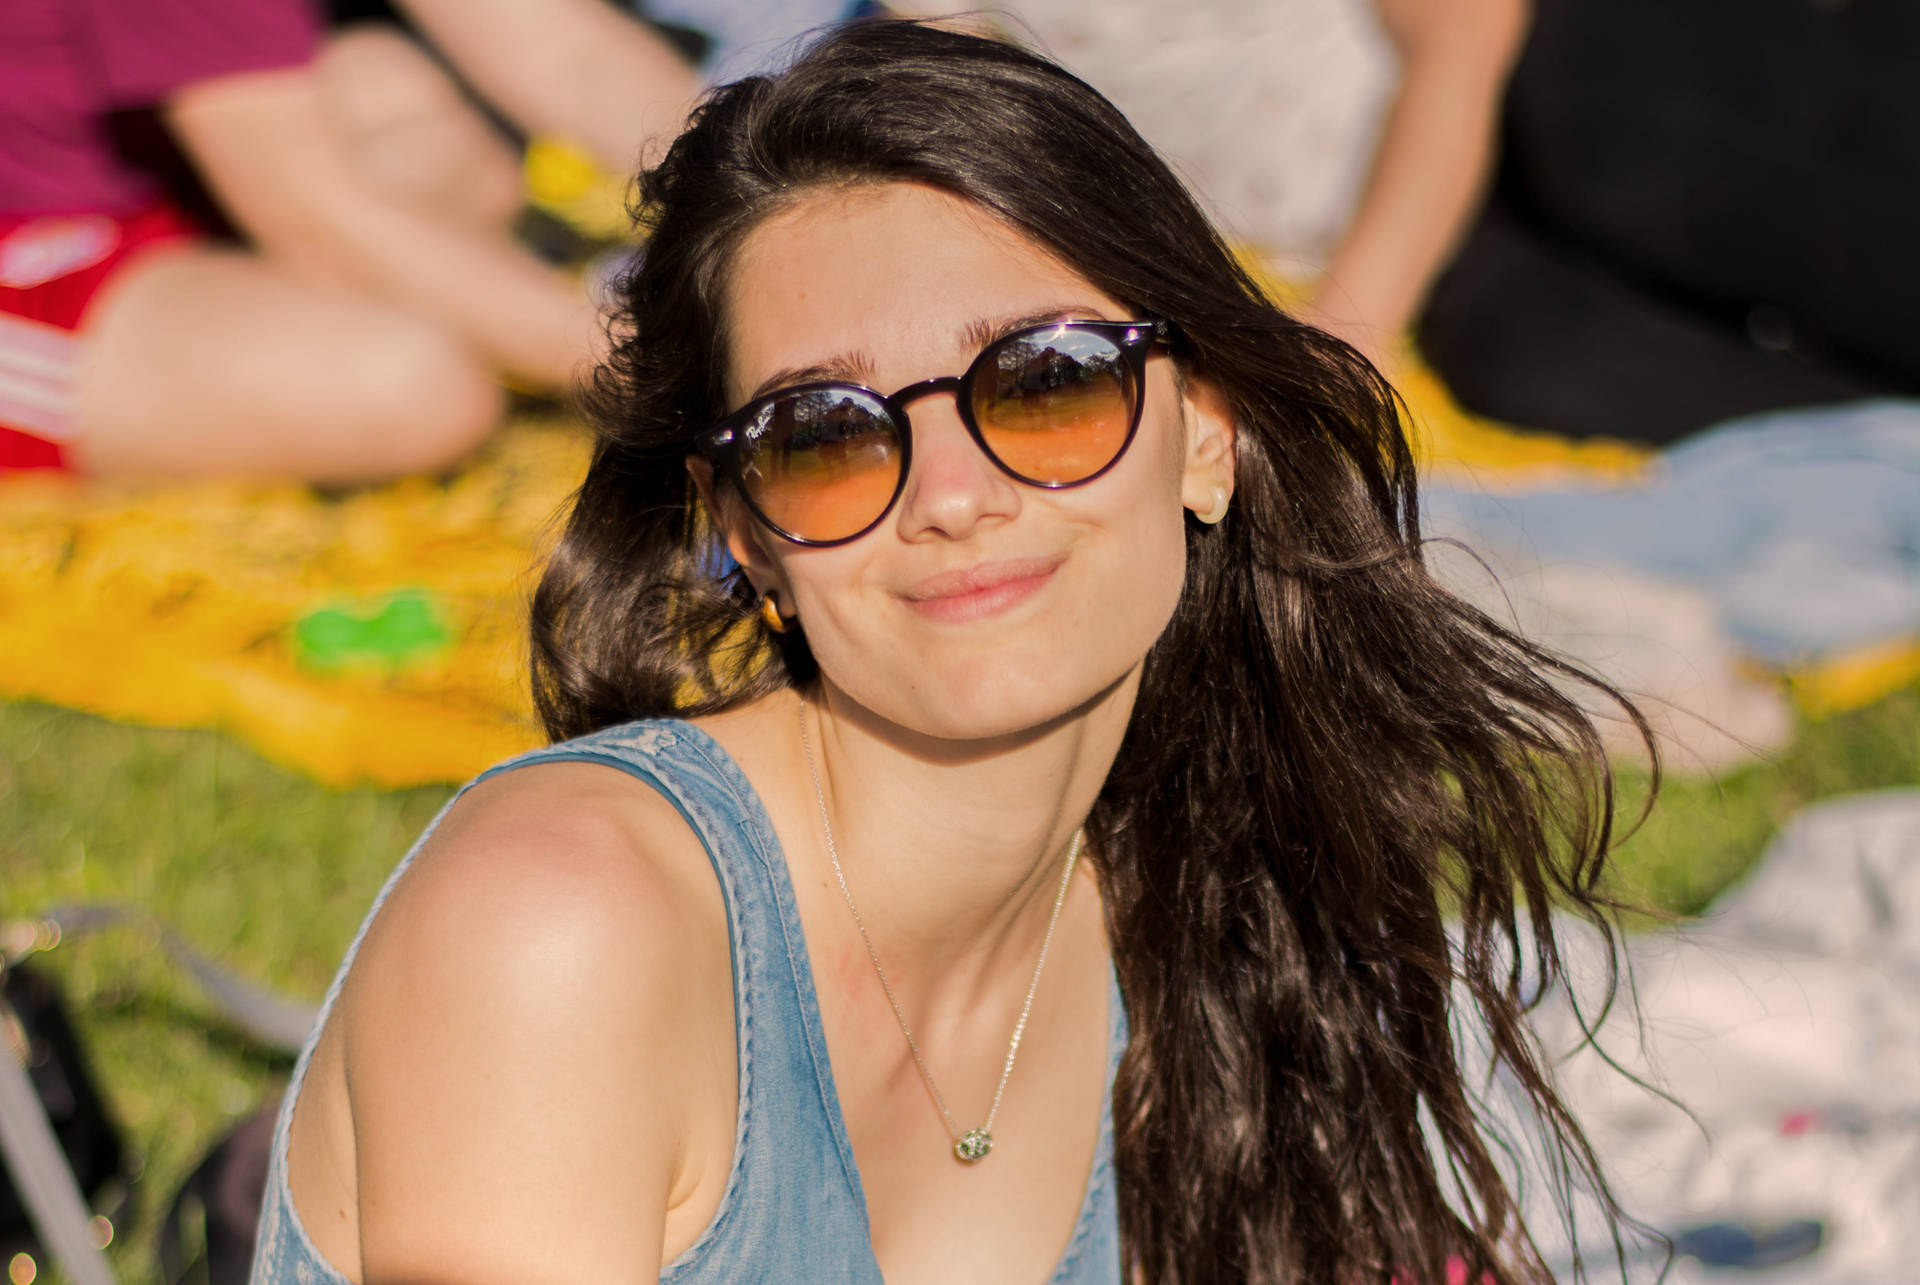 Italian Girl Wearing Sunglasses Outdoors Picture